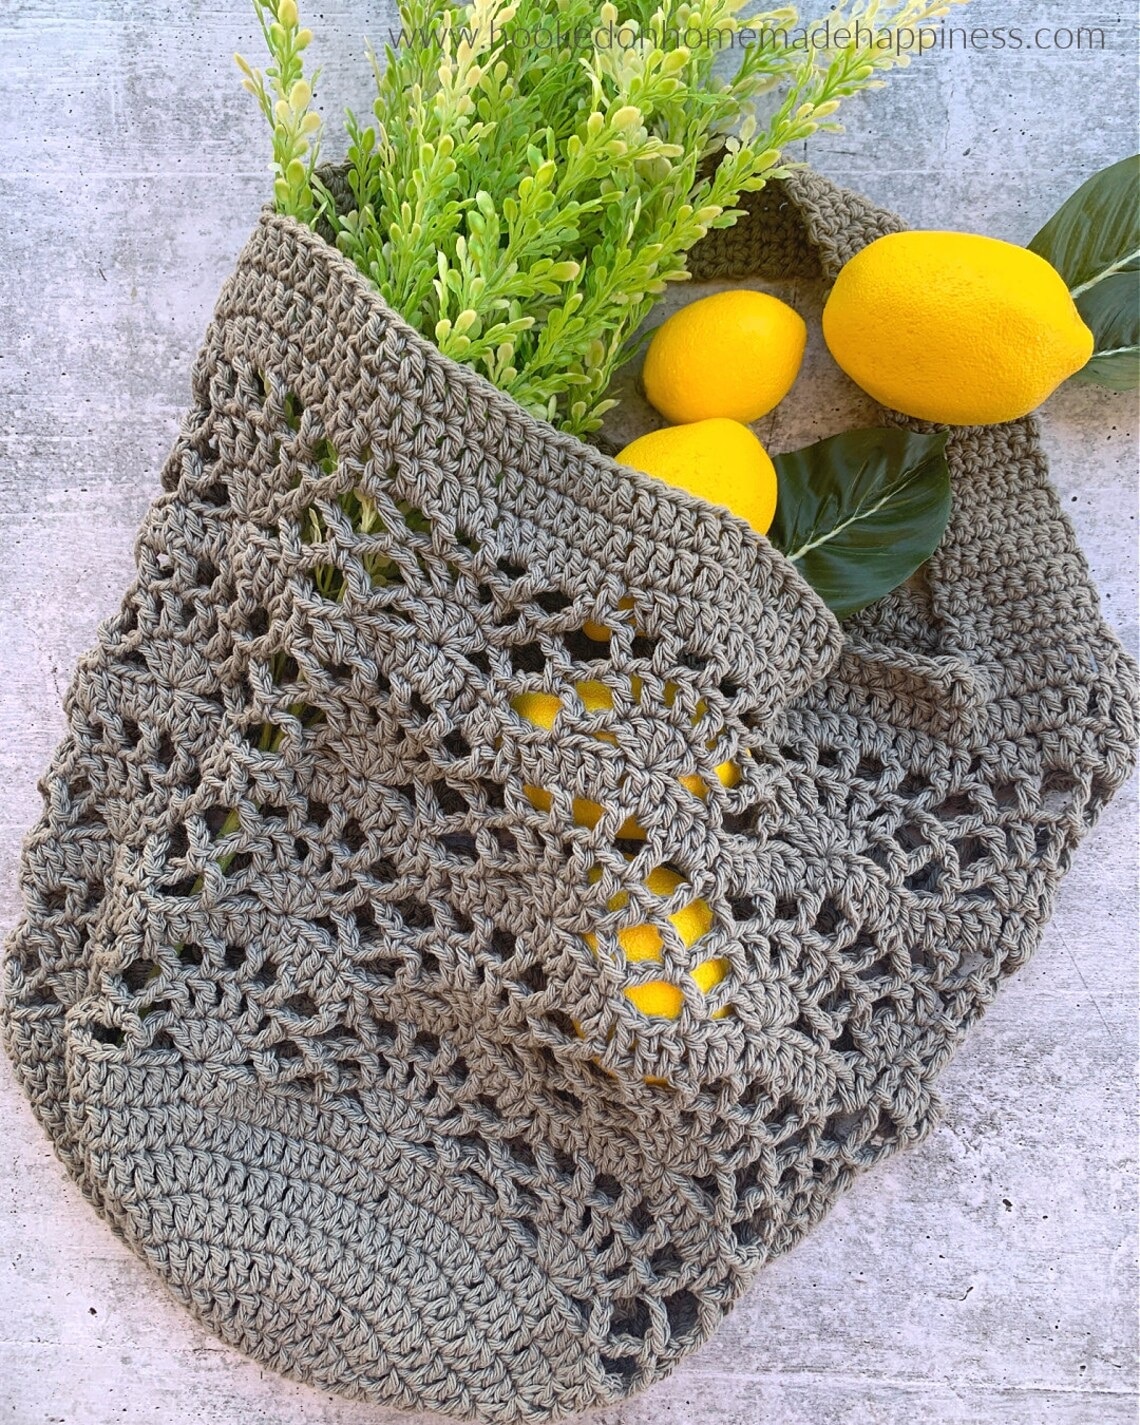 A light gray lattice style crochet market bag with a fan shaped pattern on a cream background with lemons and leaves in the bag.